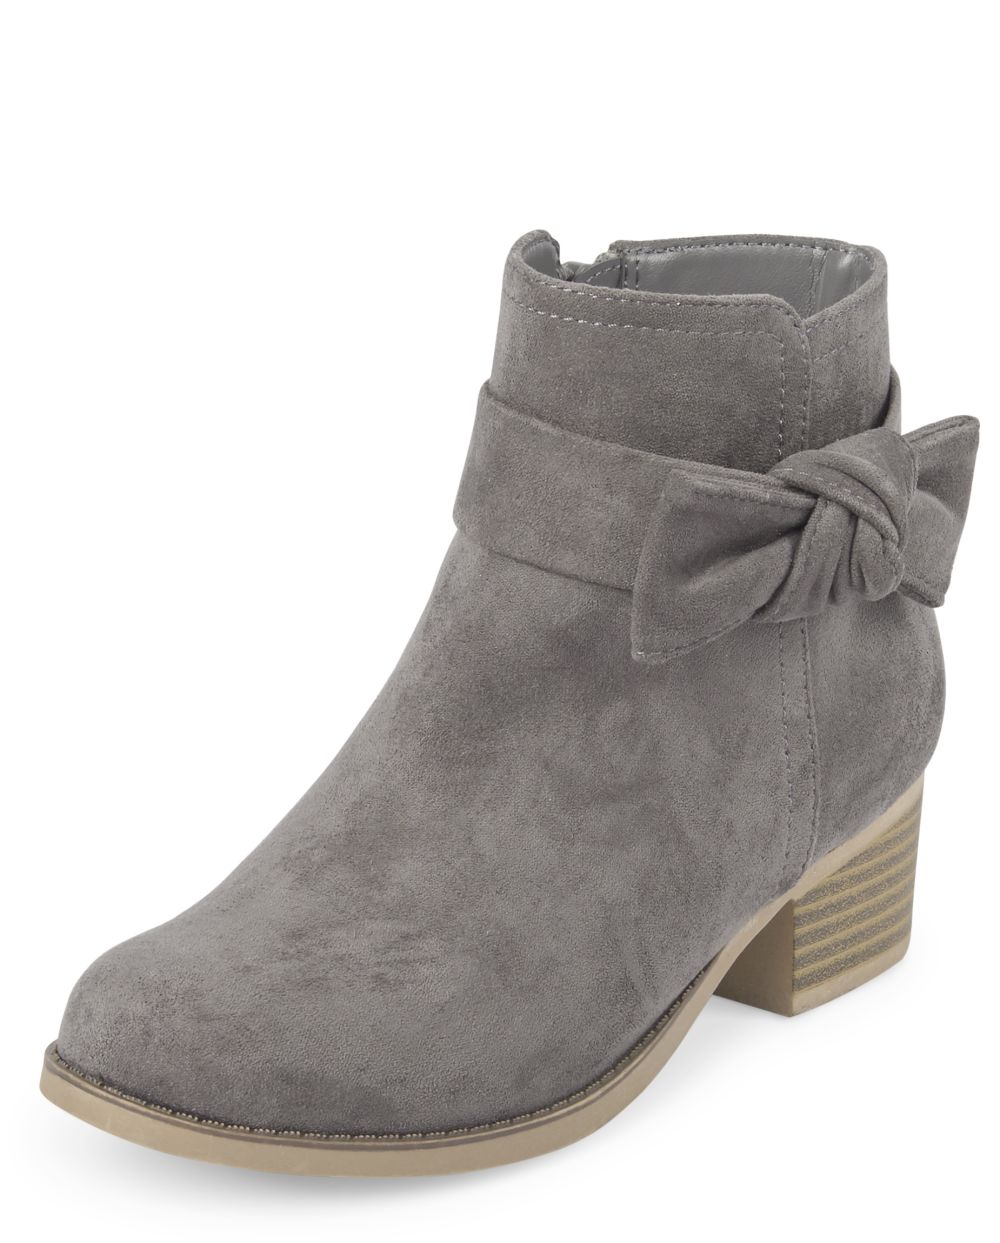 

Girls Bow Low Heel Booties - Gray - The Children's Place